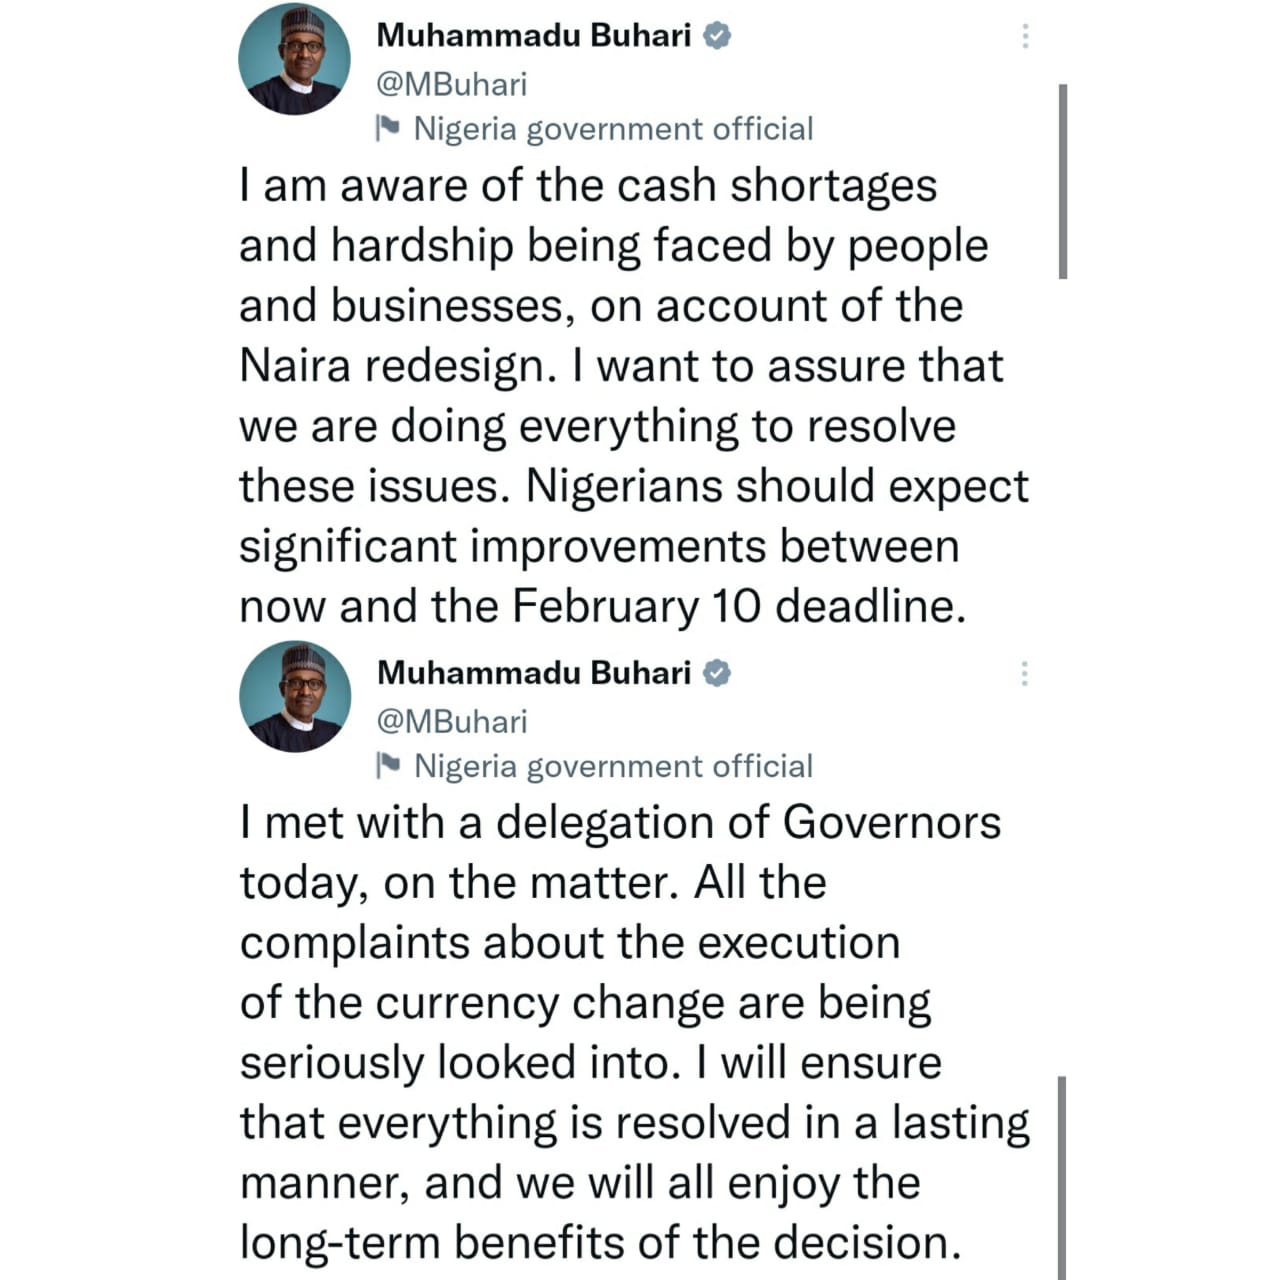 Scarcity of cash: Nigerians should expect significant improvements between now and the February 10 deadline - President Buhari